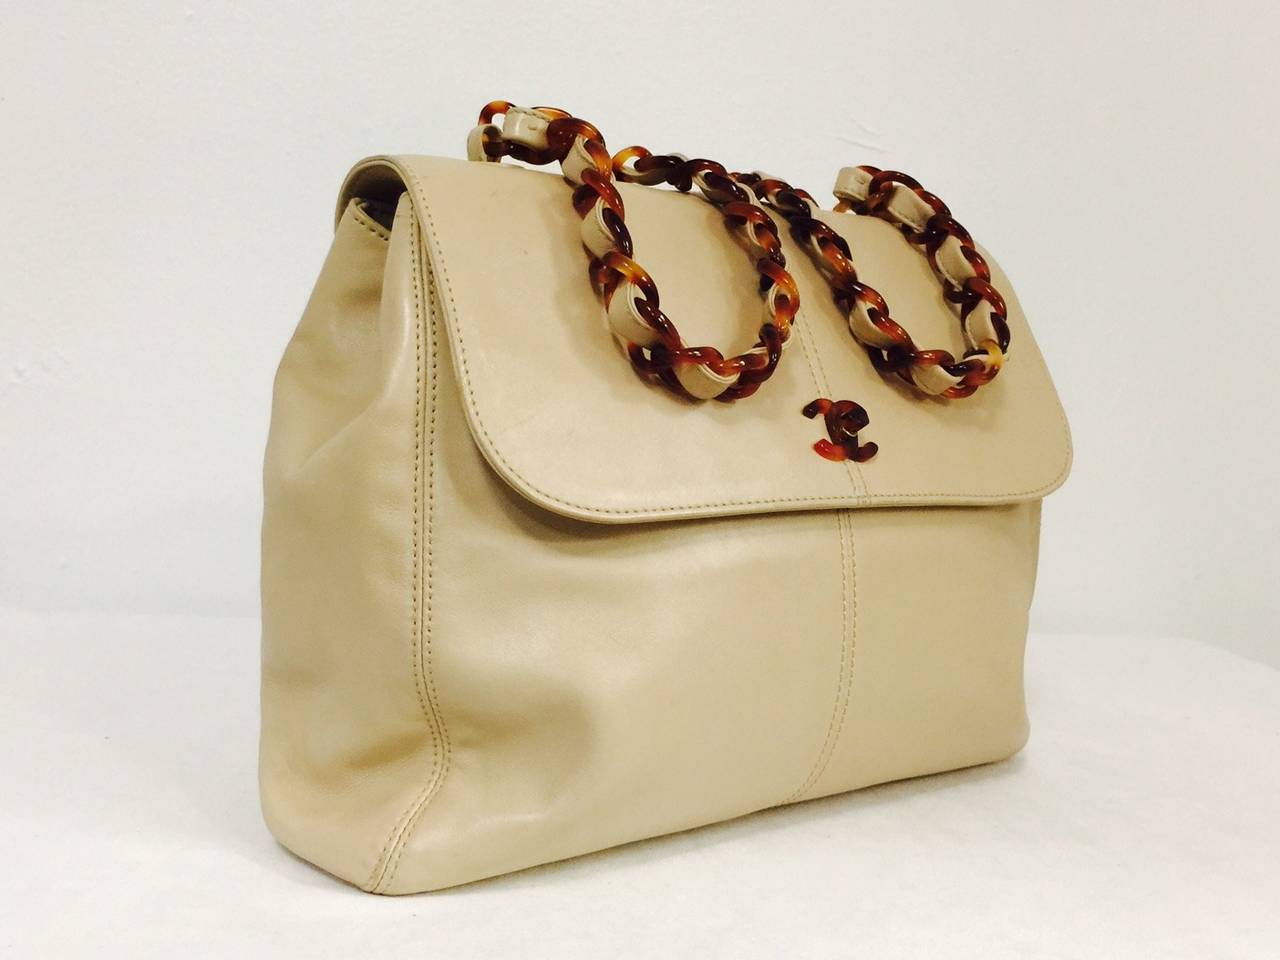 Women's 1990s Chanel Tan Lambskin Shoulder Bag With Leather Woven Resin Strap